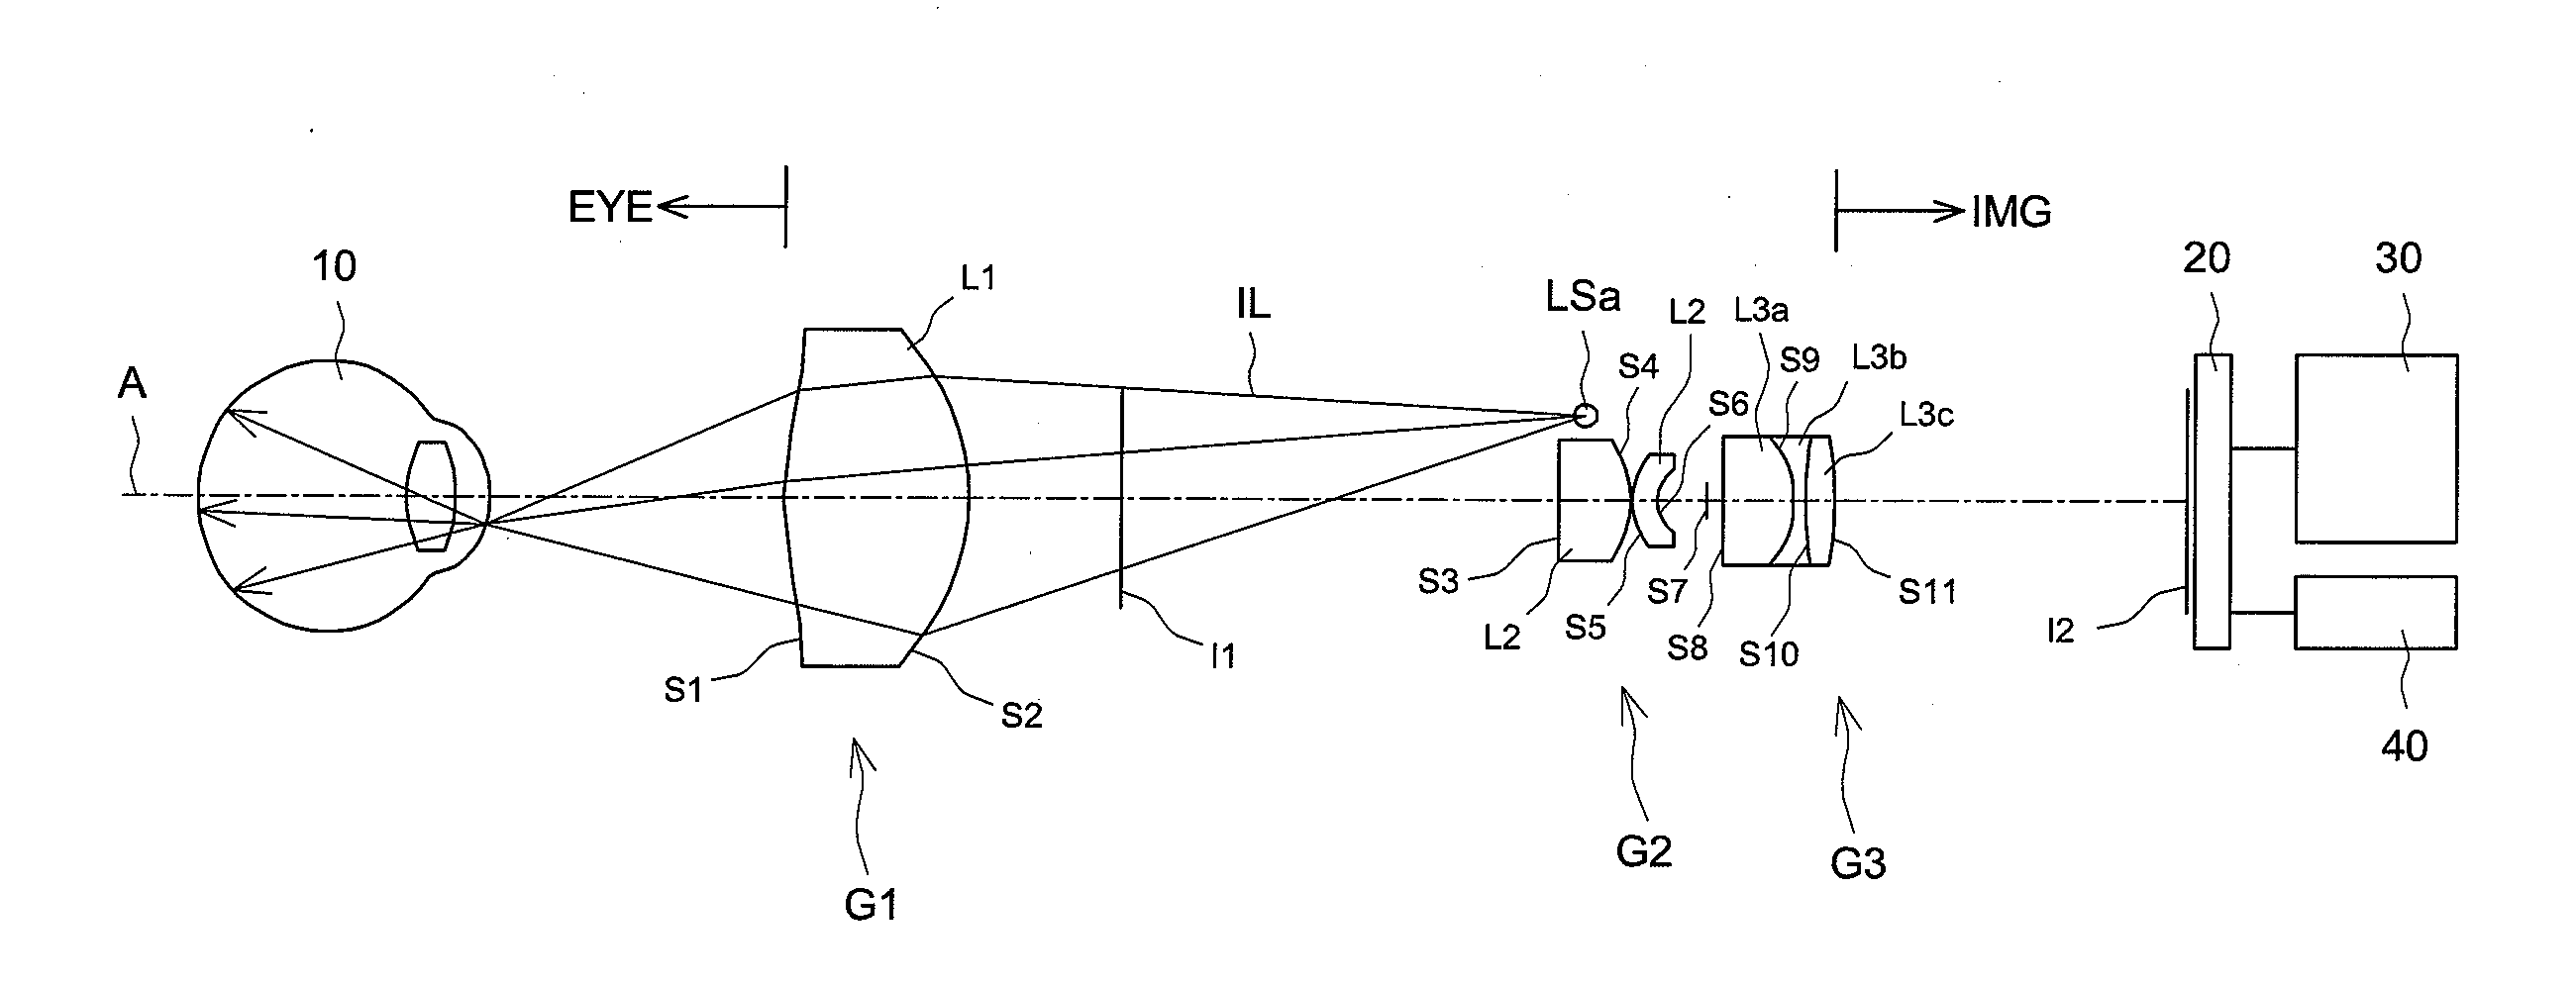 Lens module and eye fundus camera using the same